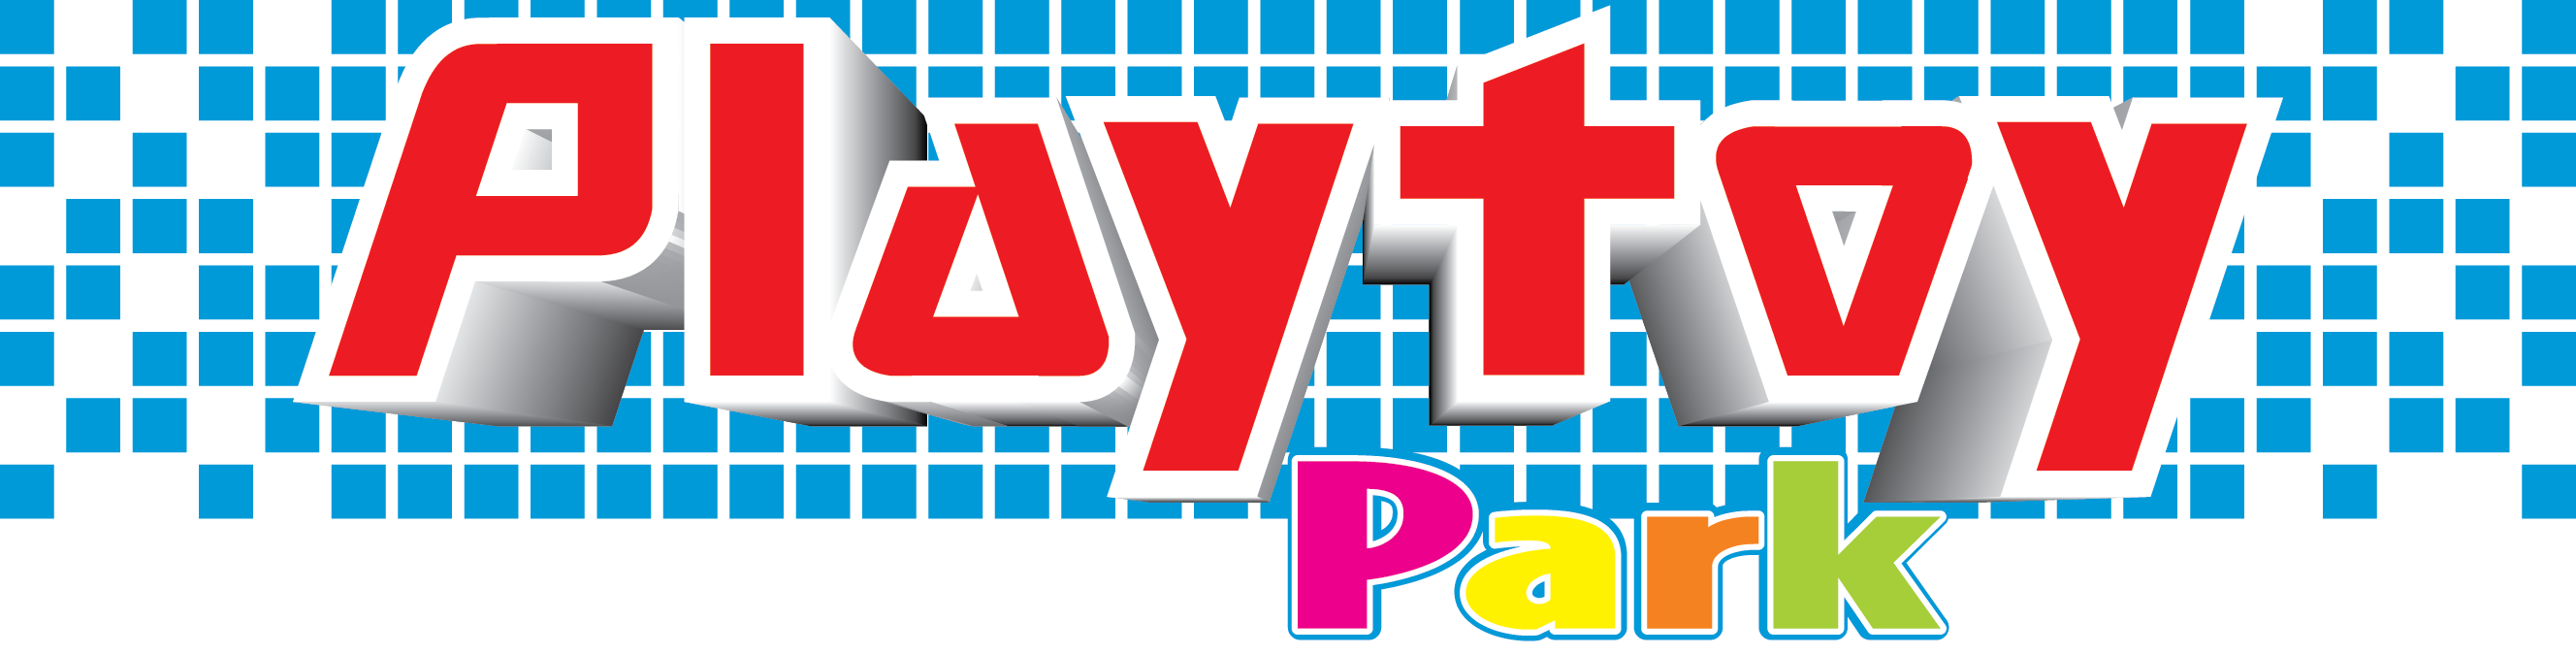 Play Toy